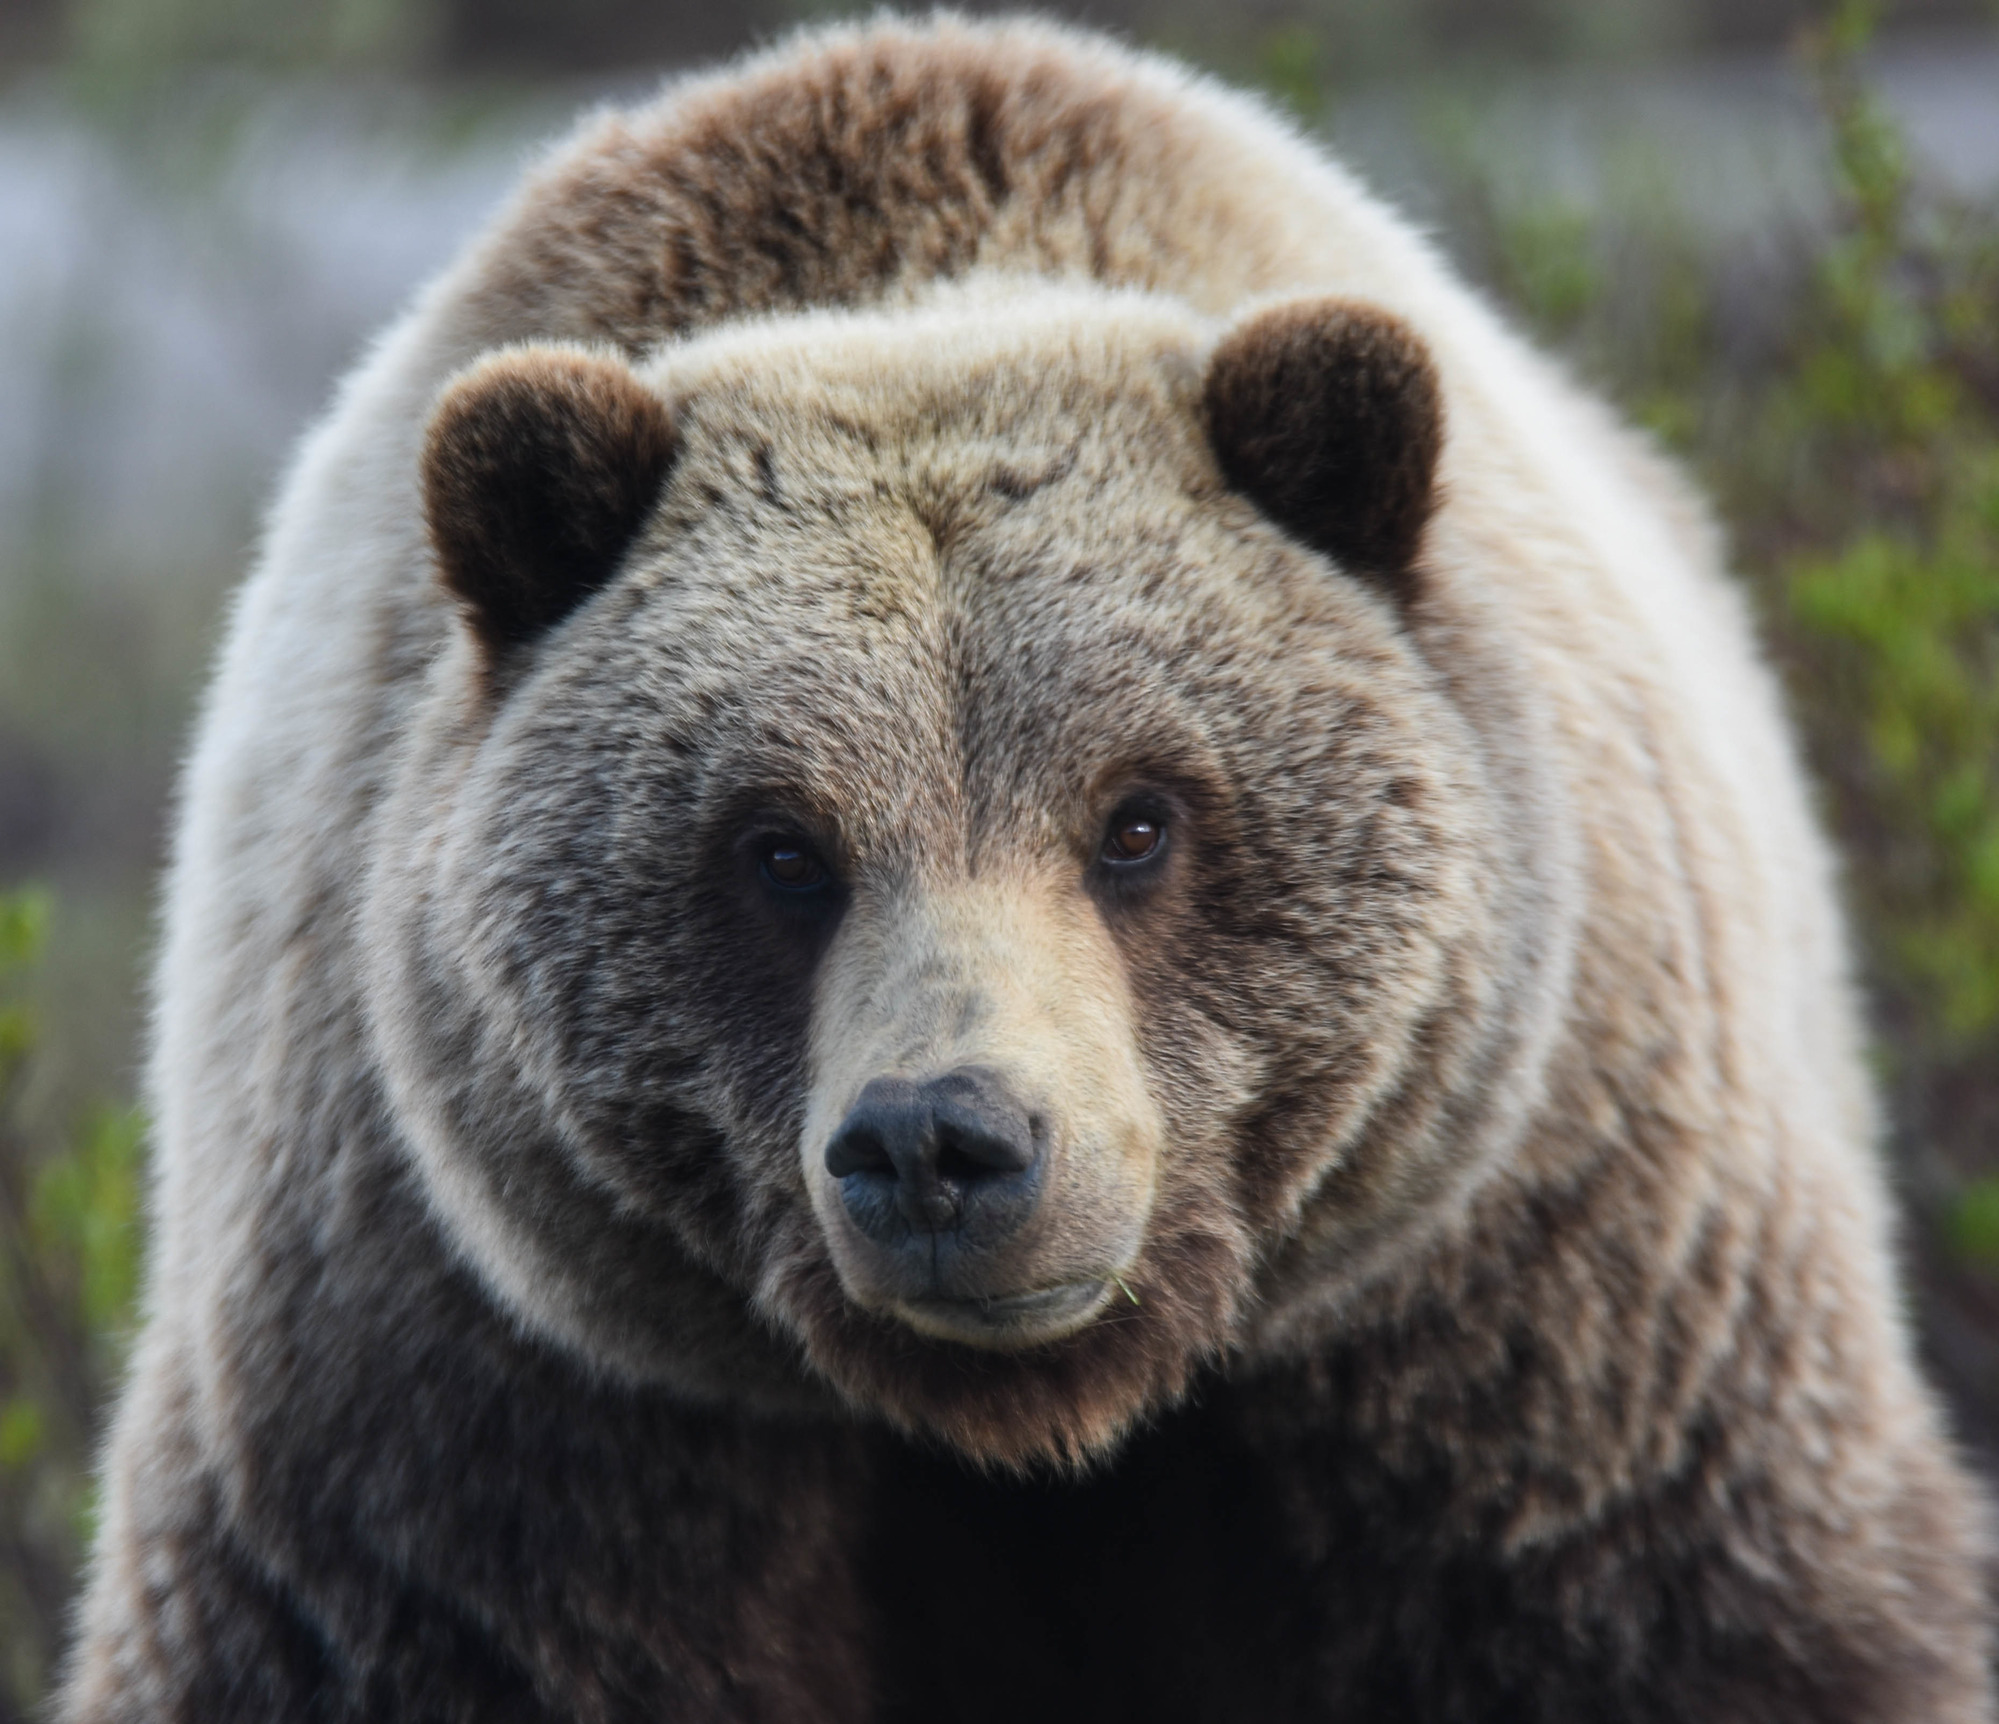 A female grizzly bear